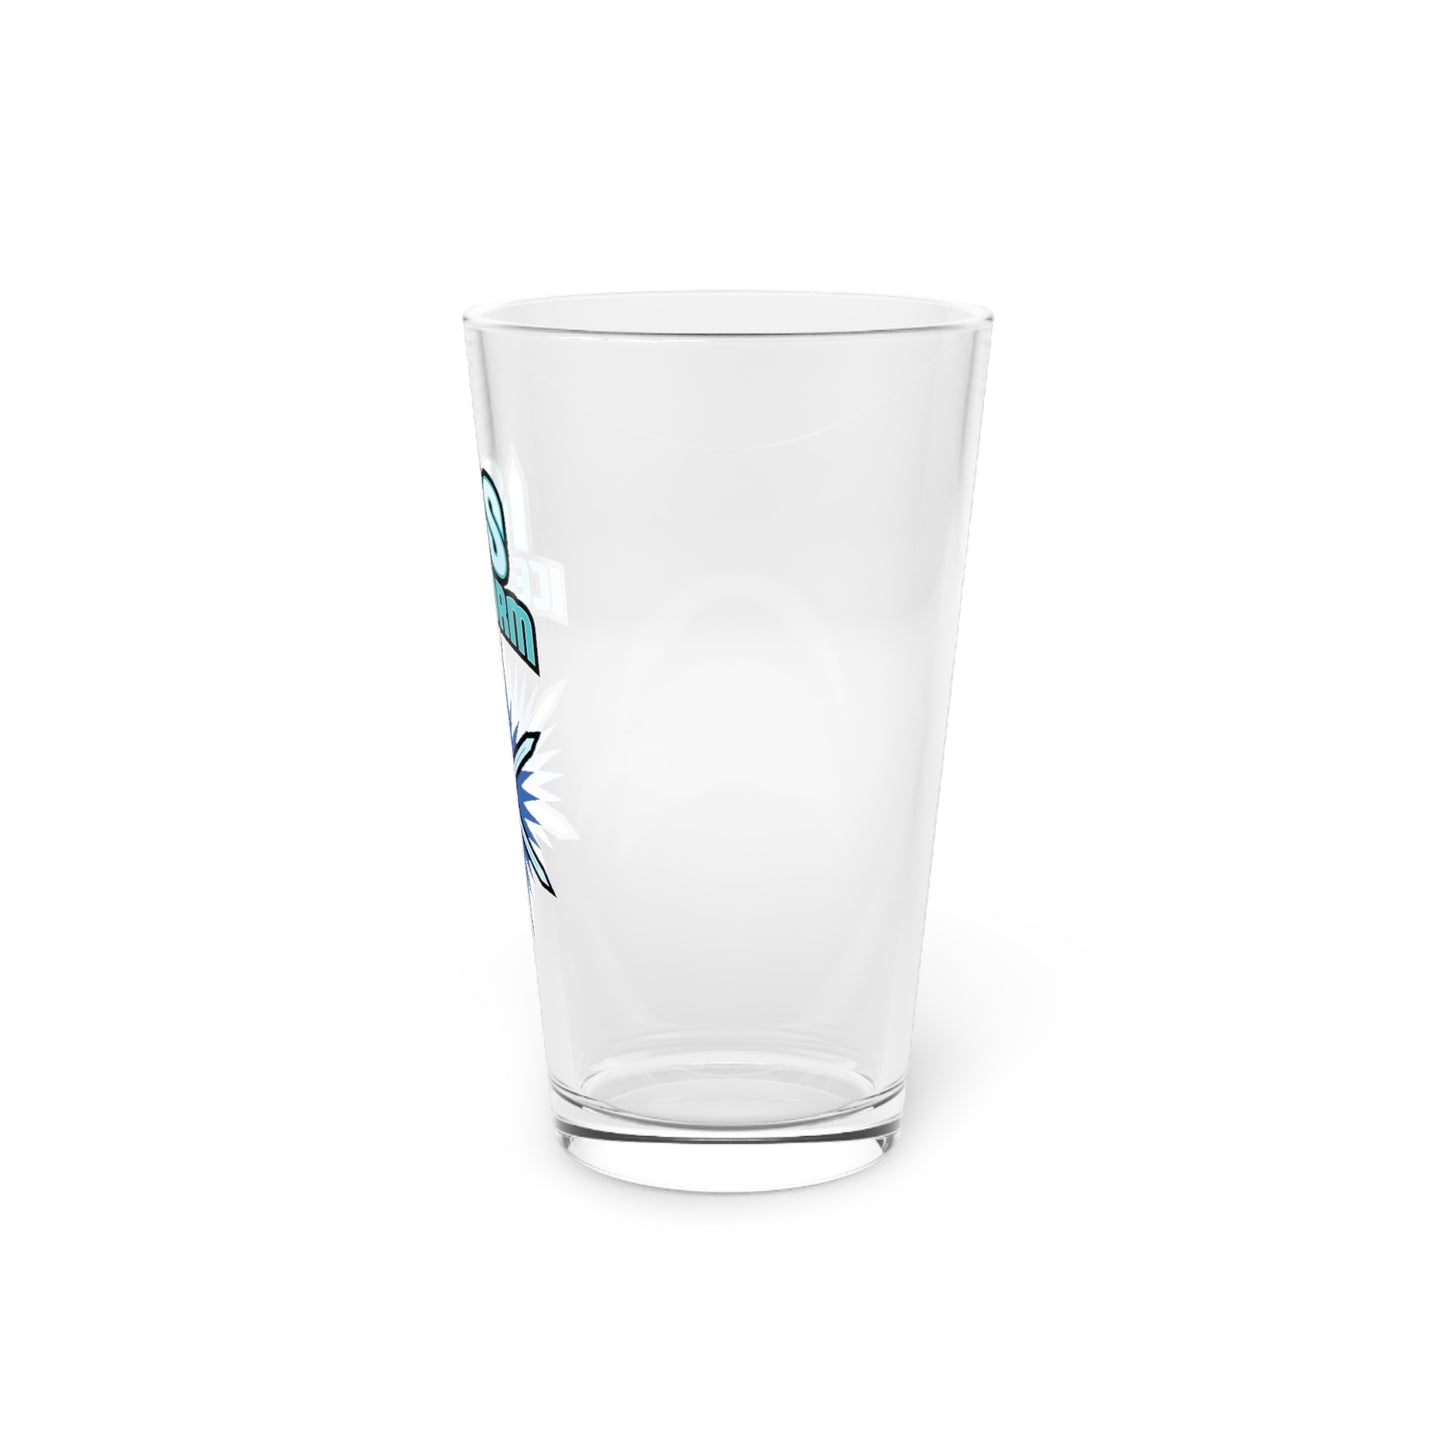 Isis Ice Storm Pint Glass, 16oz